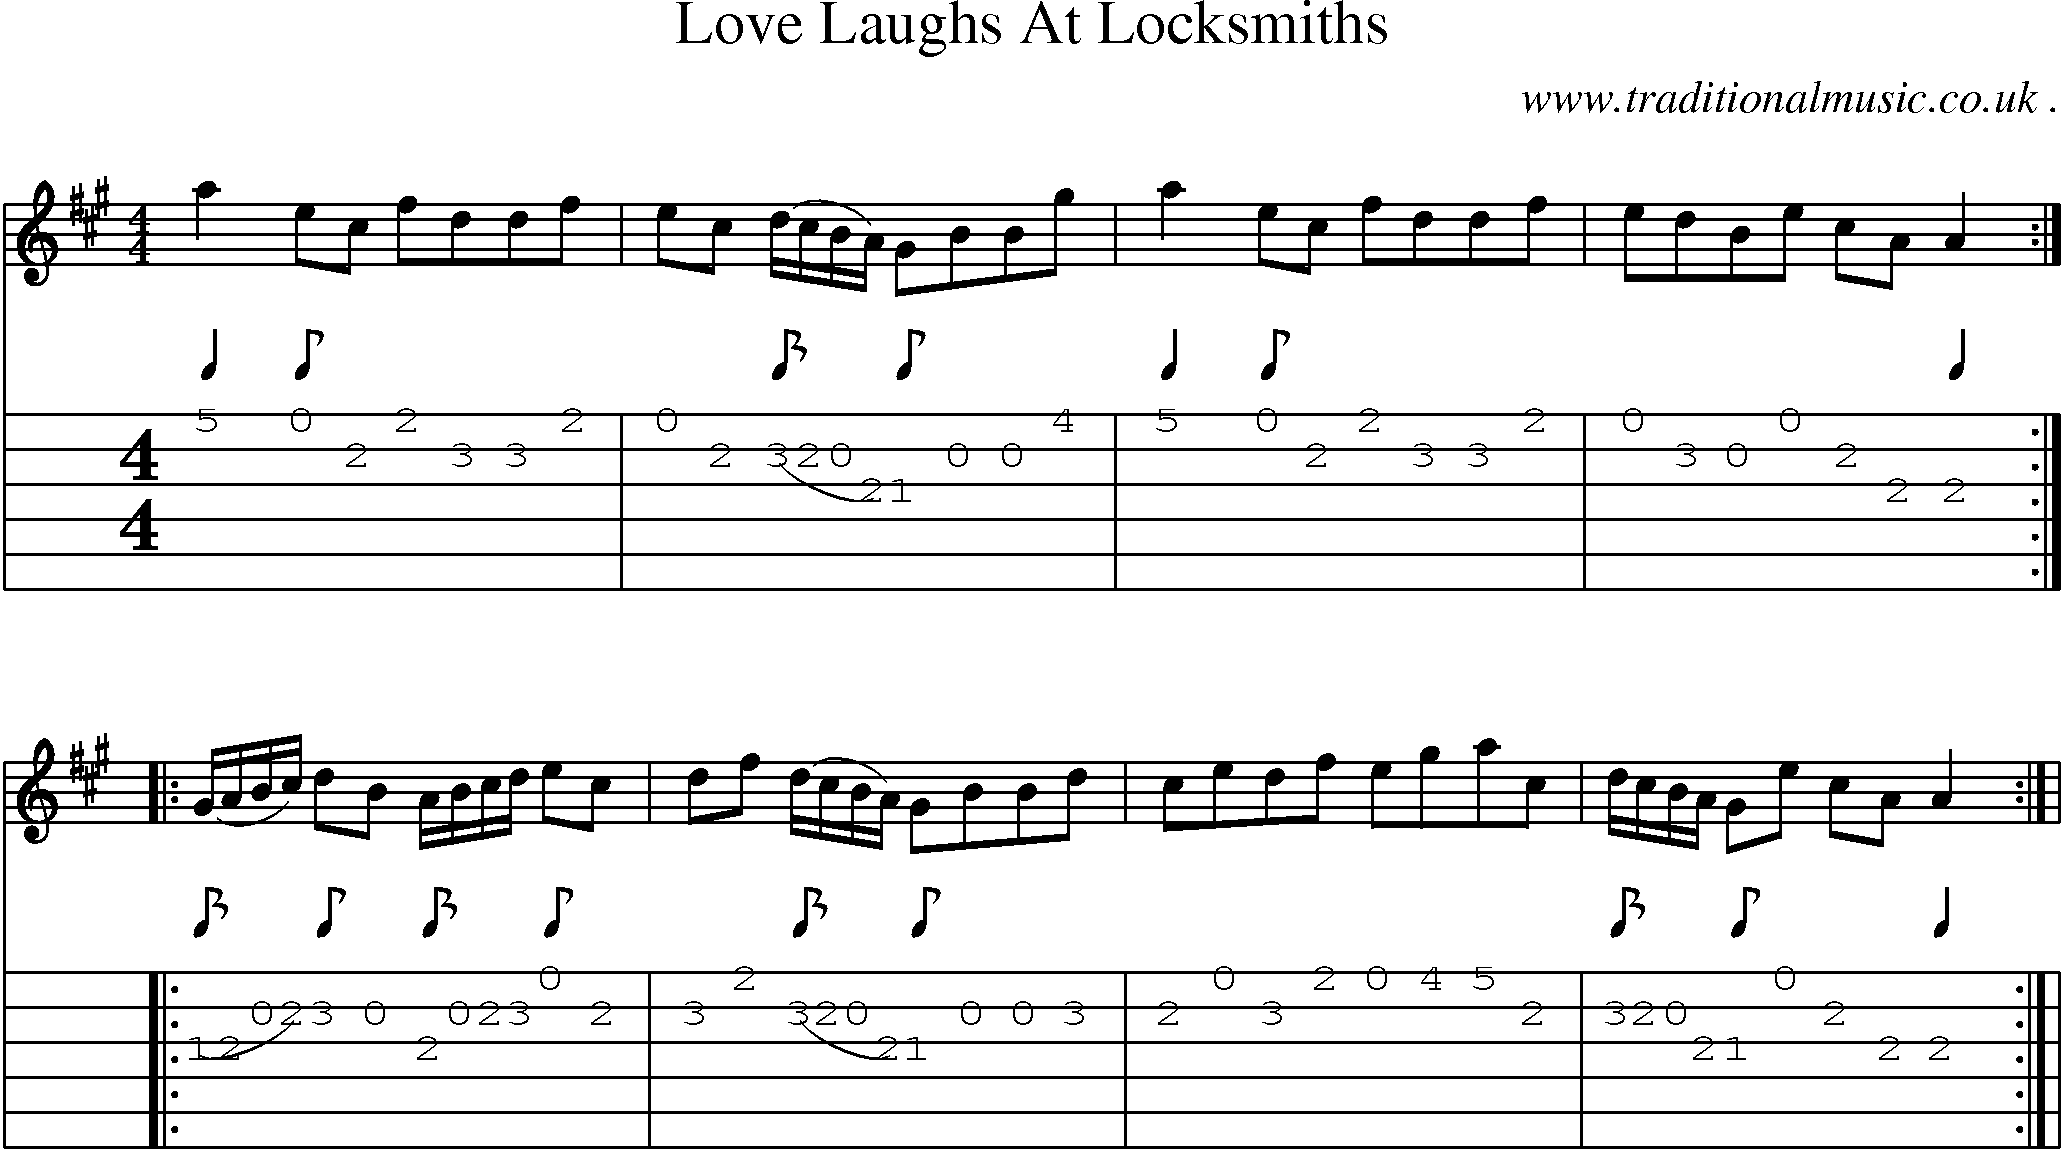 Sheet-Music and Guitar Tabs for Love Laughs At Locksmiths